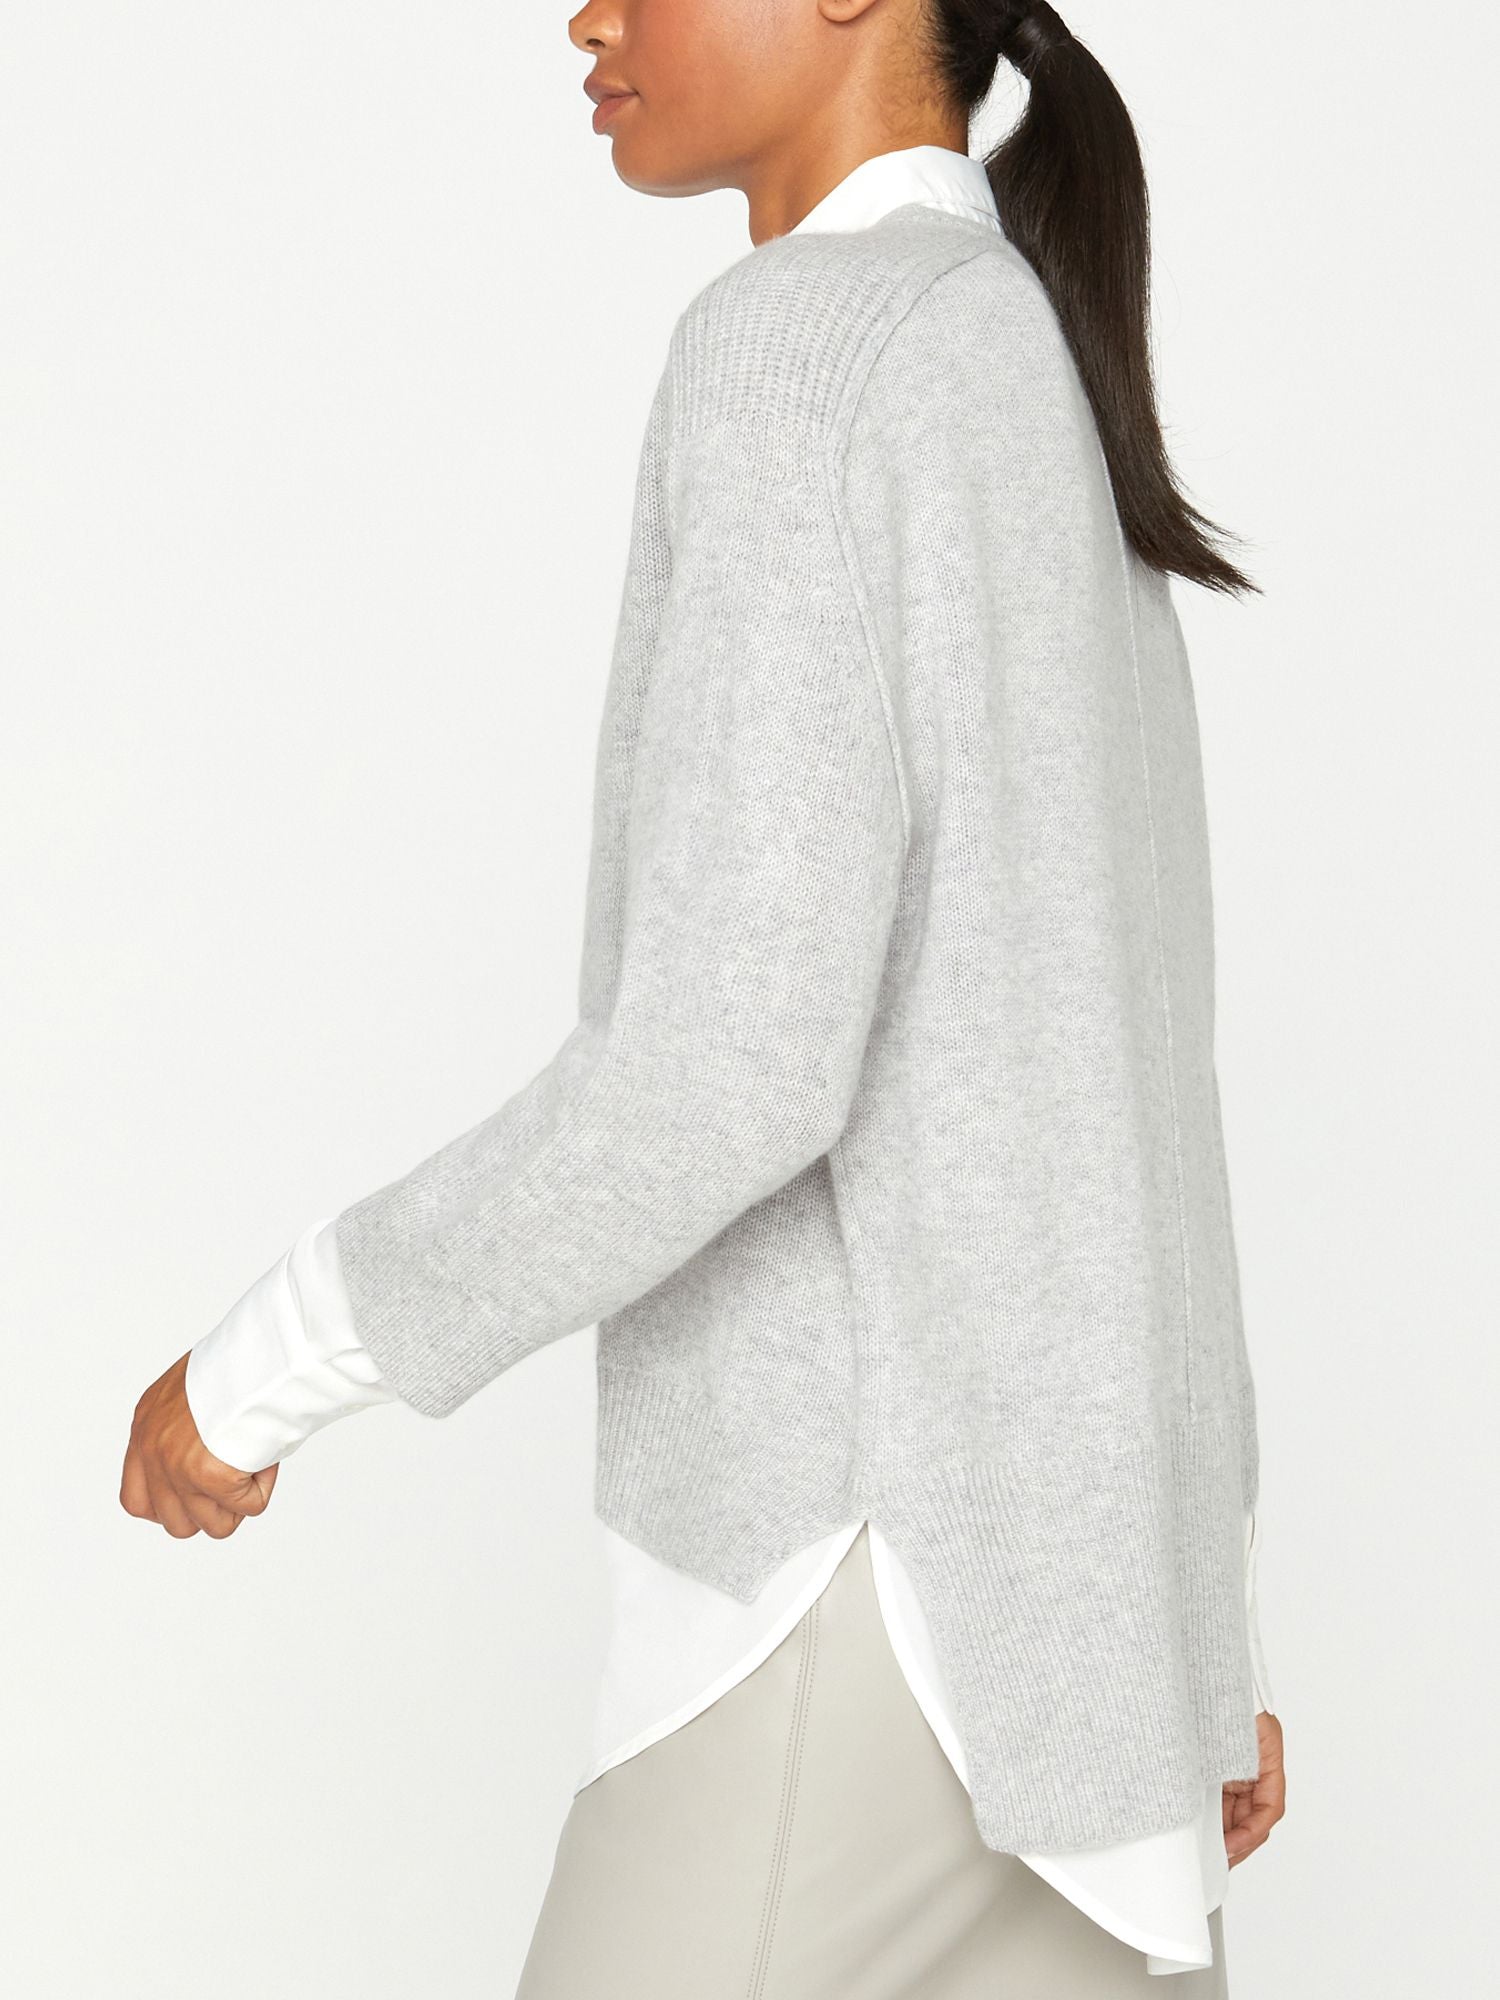 Looker ligth light grey layered v-neck sweater side view